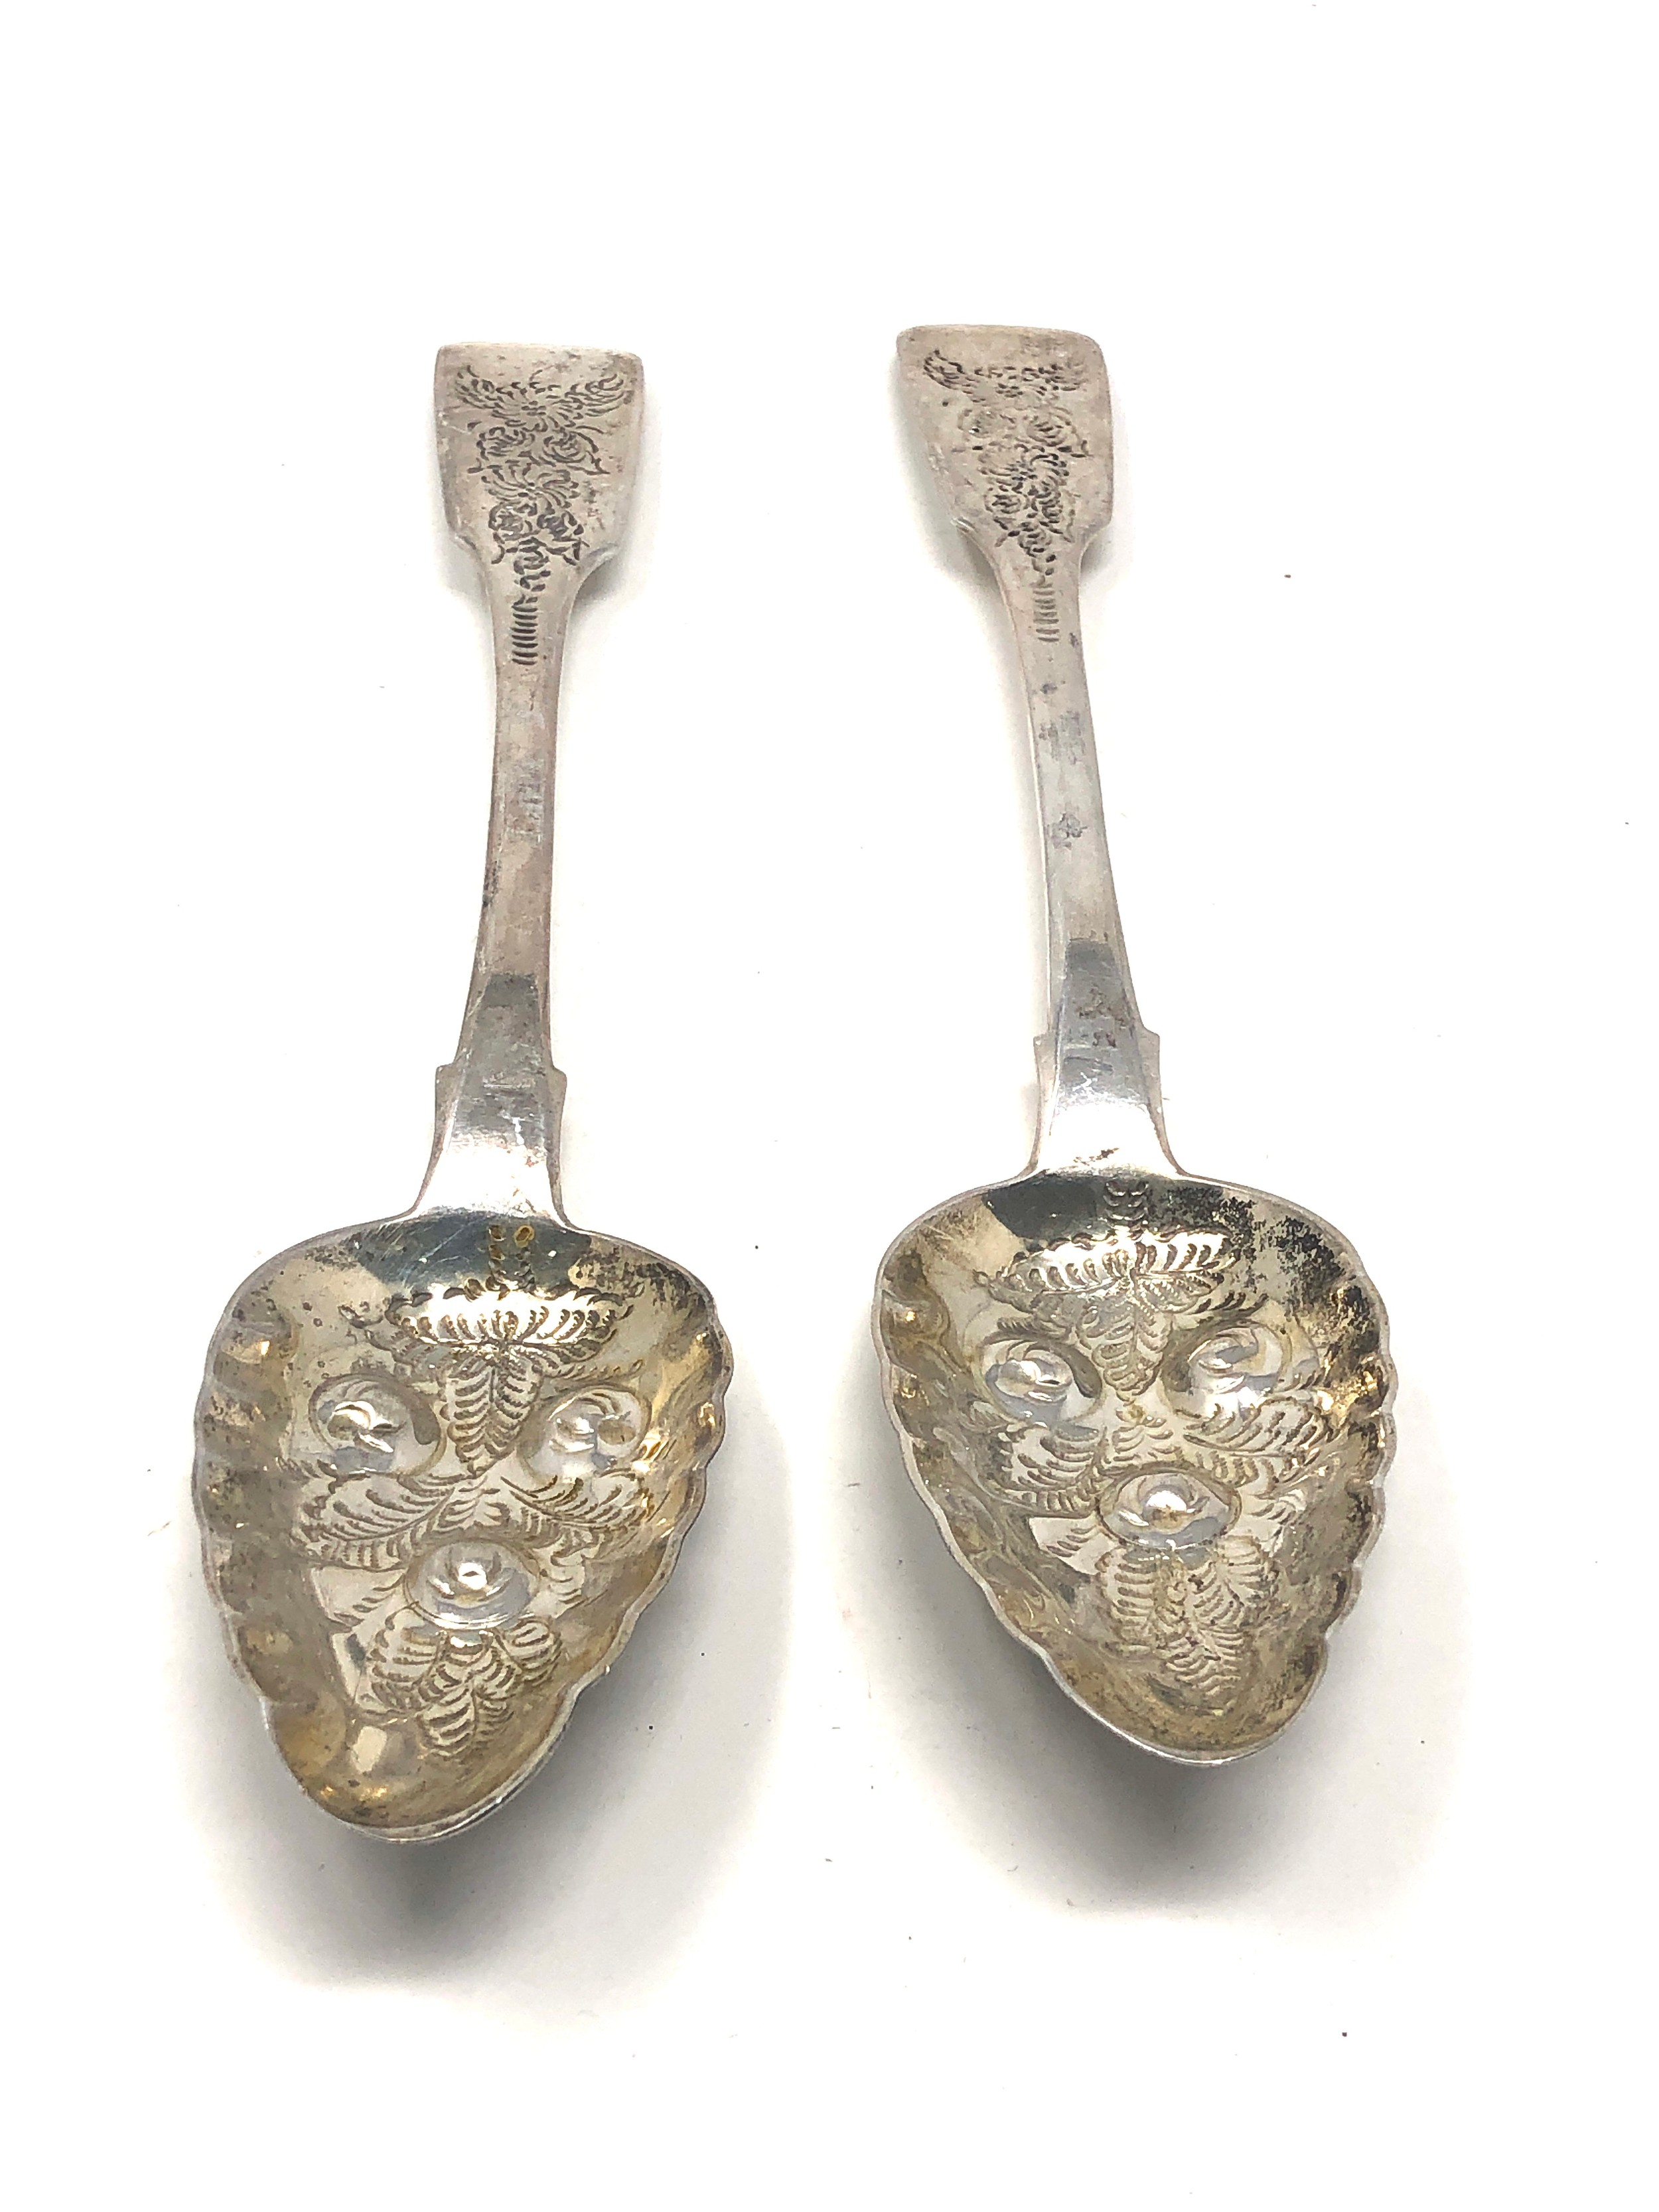 Pair of antique georgian silver berry spoons weight 120g - Image 2 of 5